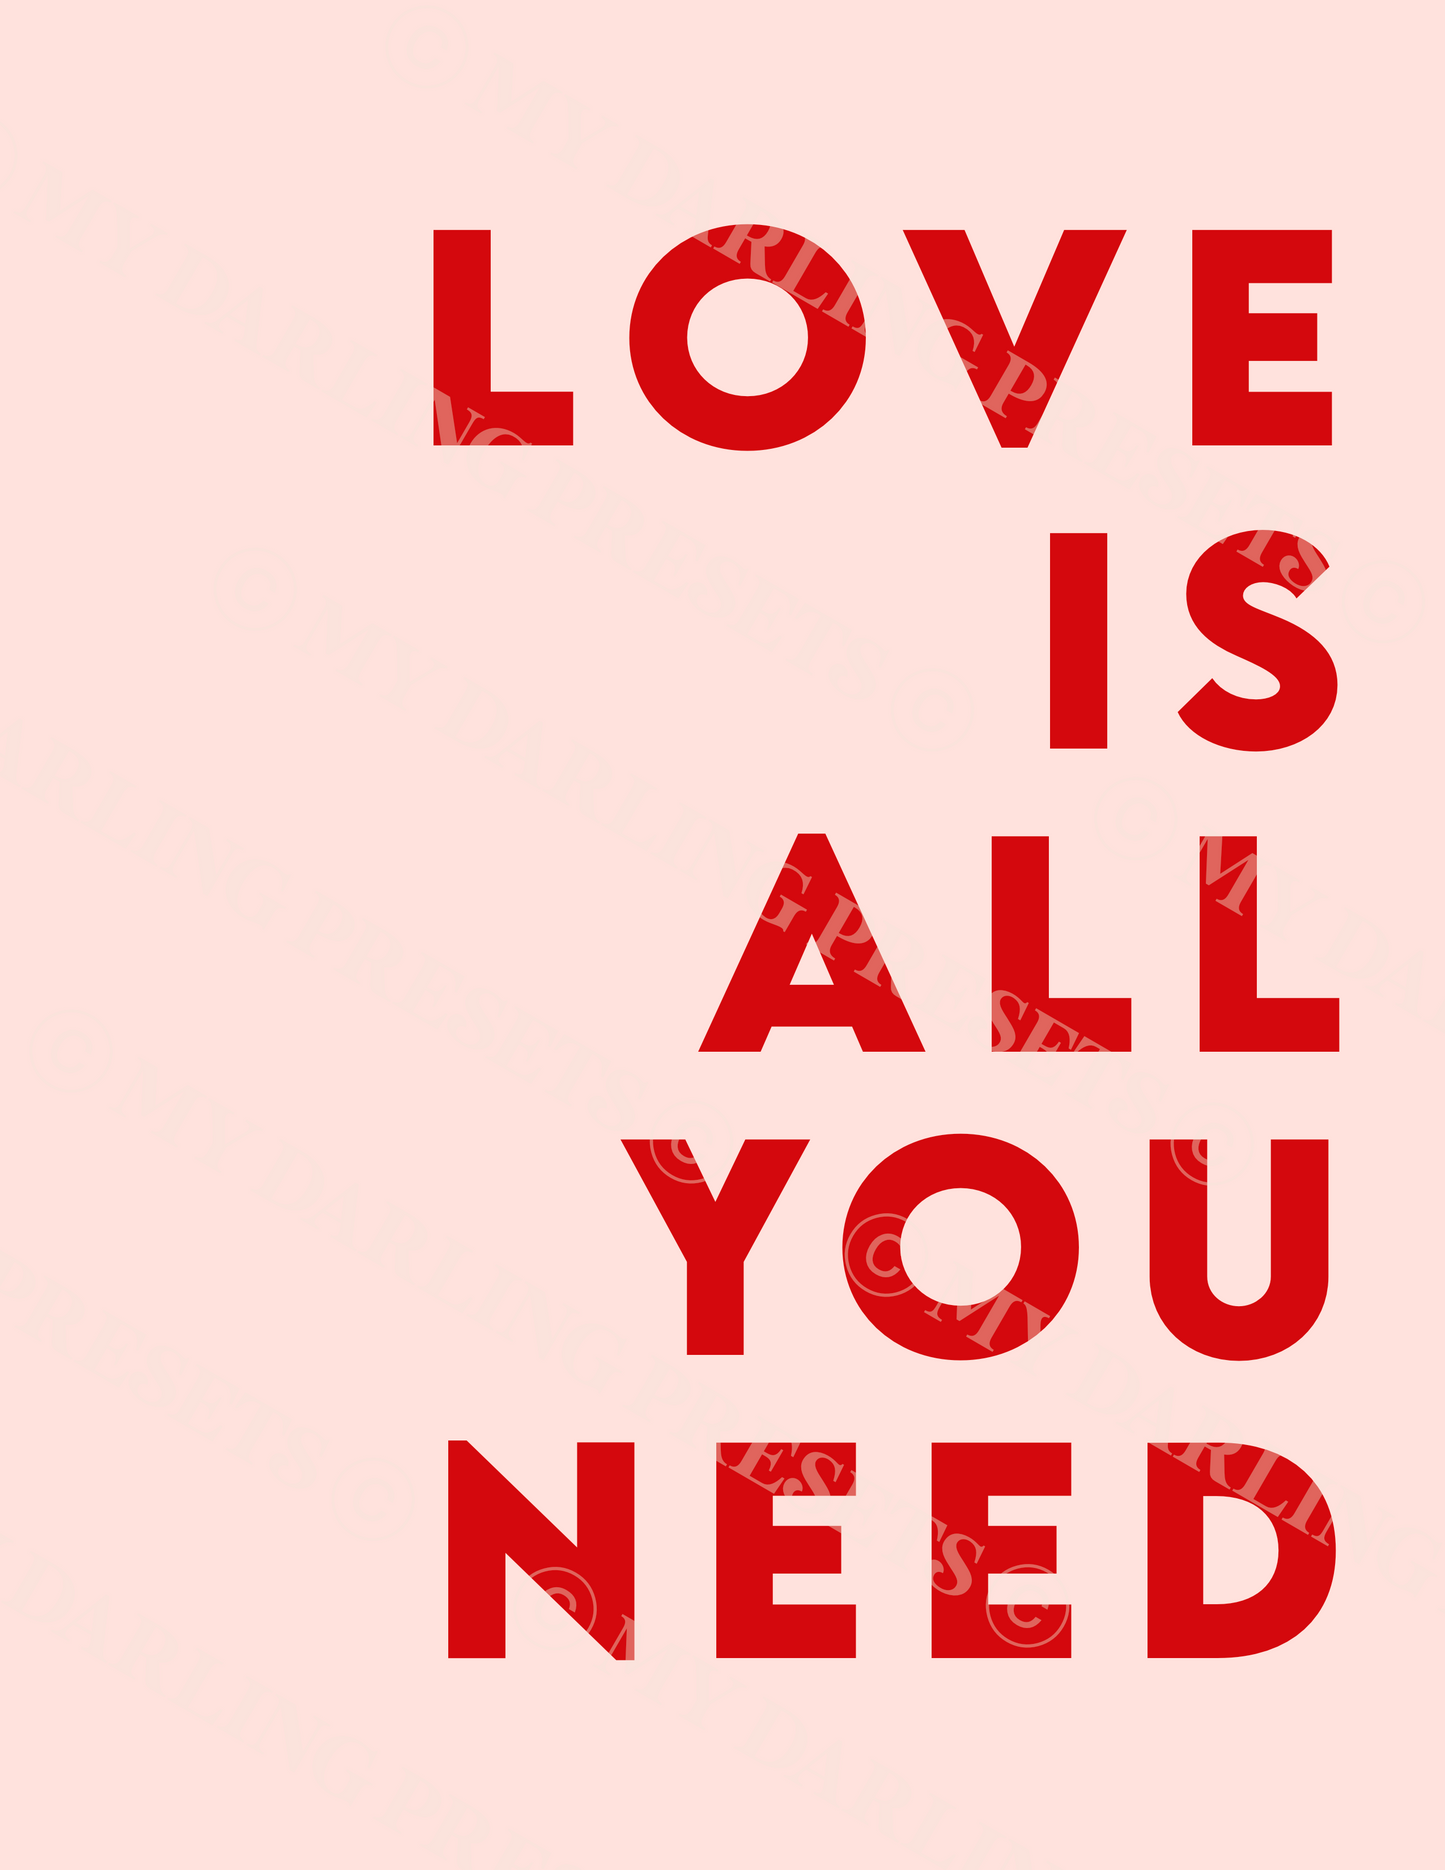 All You Need Is Love - Printables